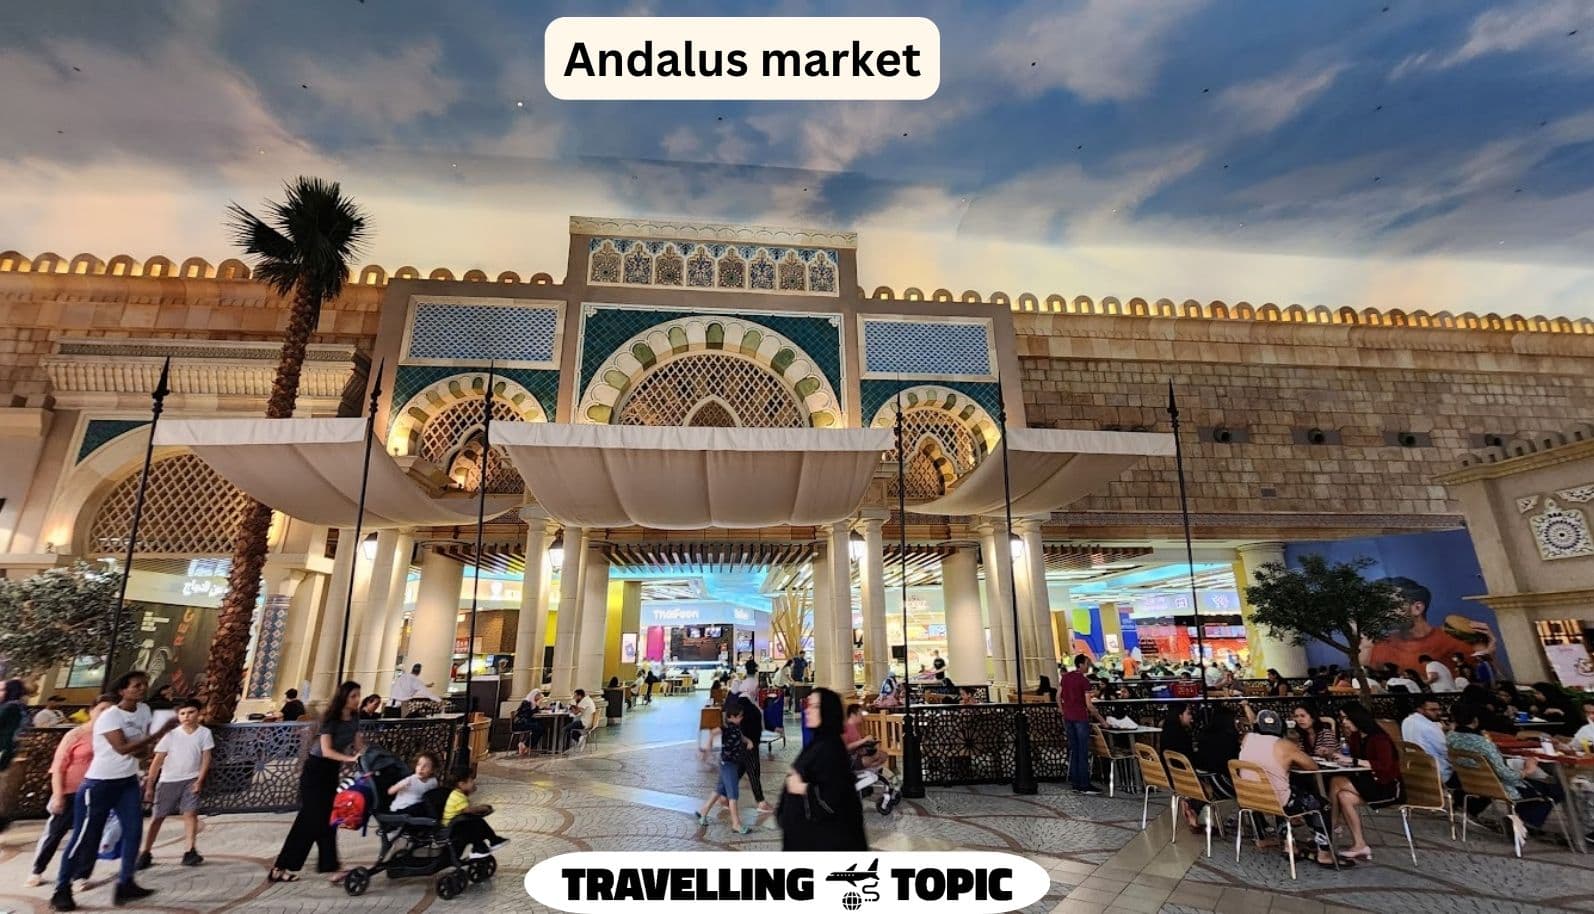 Andalus market